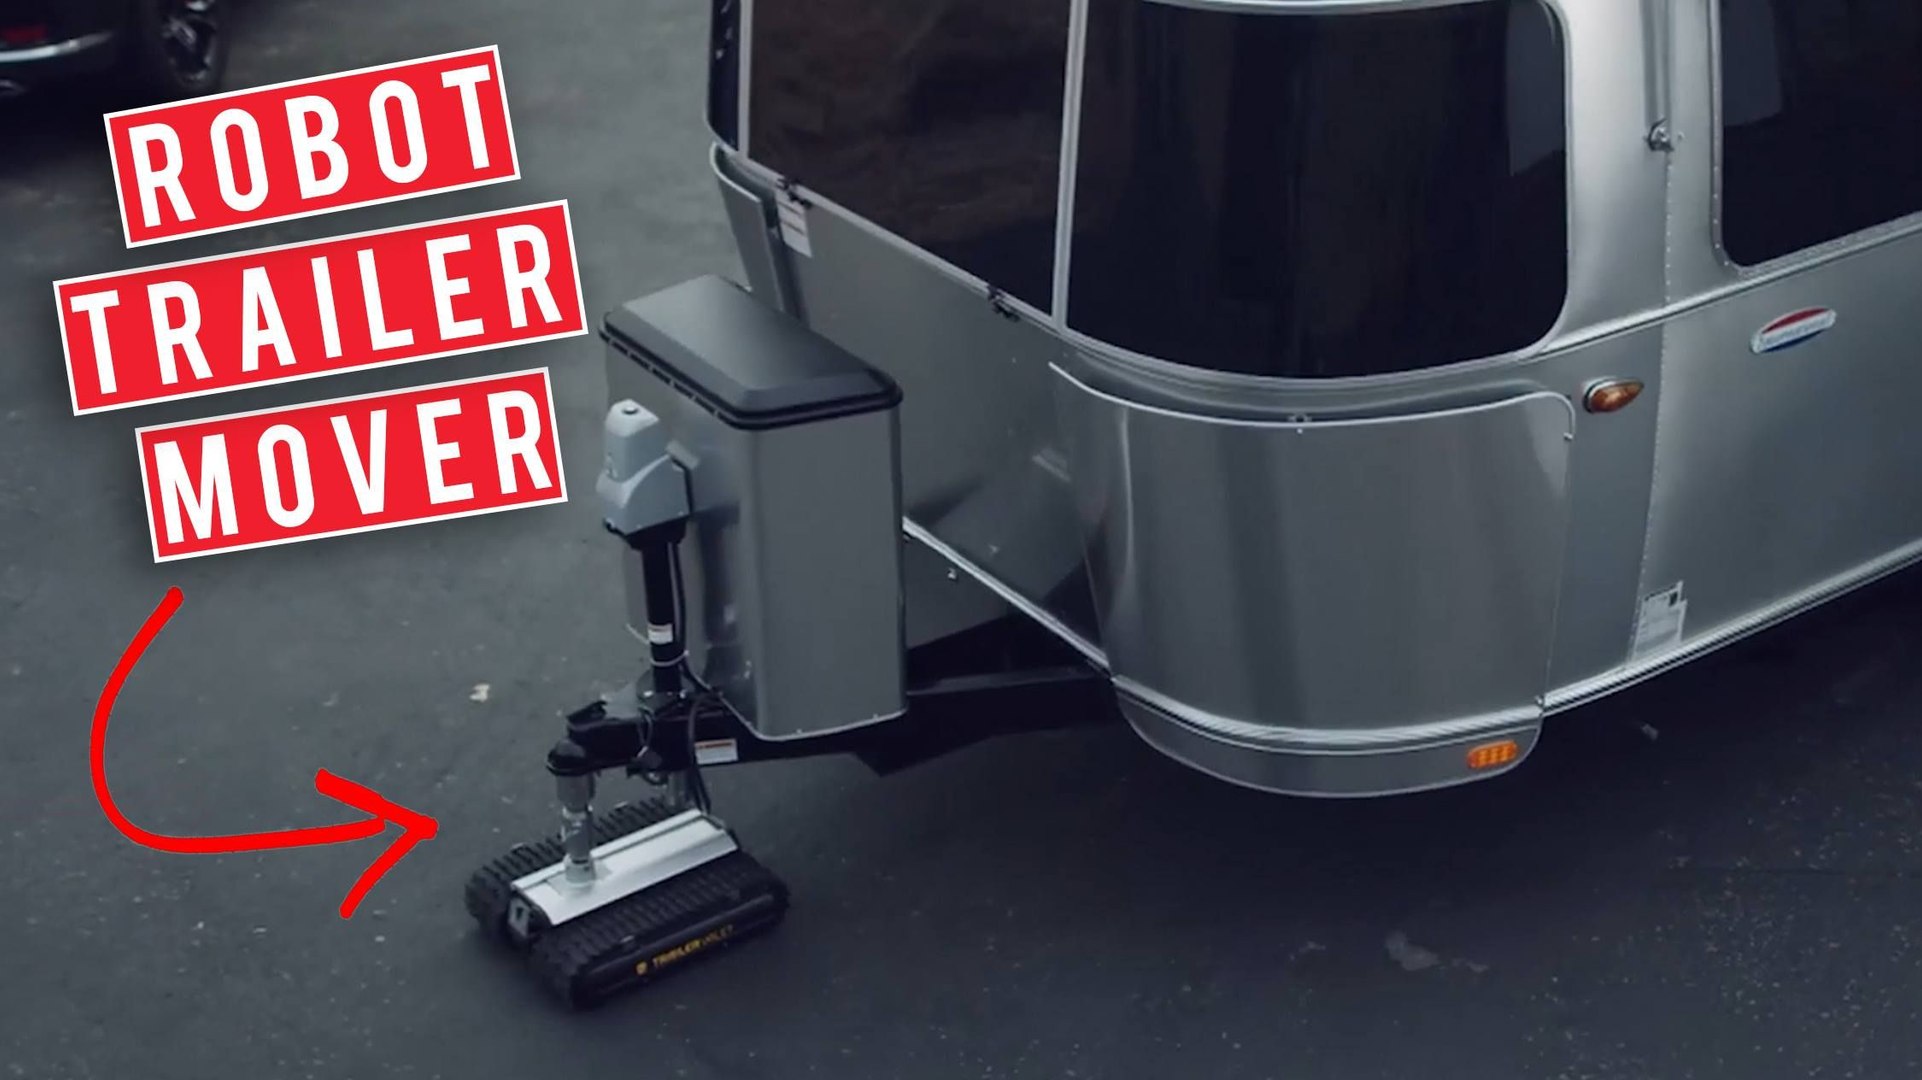 Robot Trailer Mover - video Dailymotion